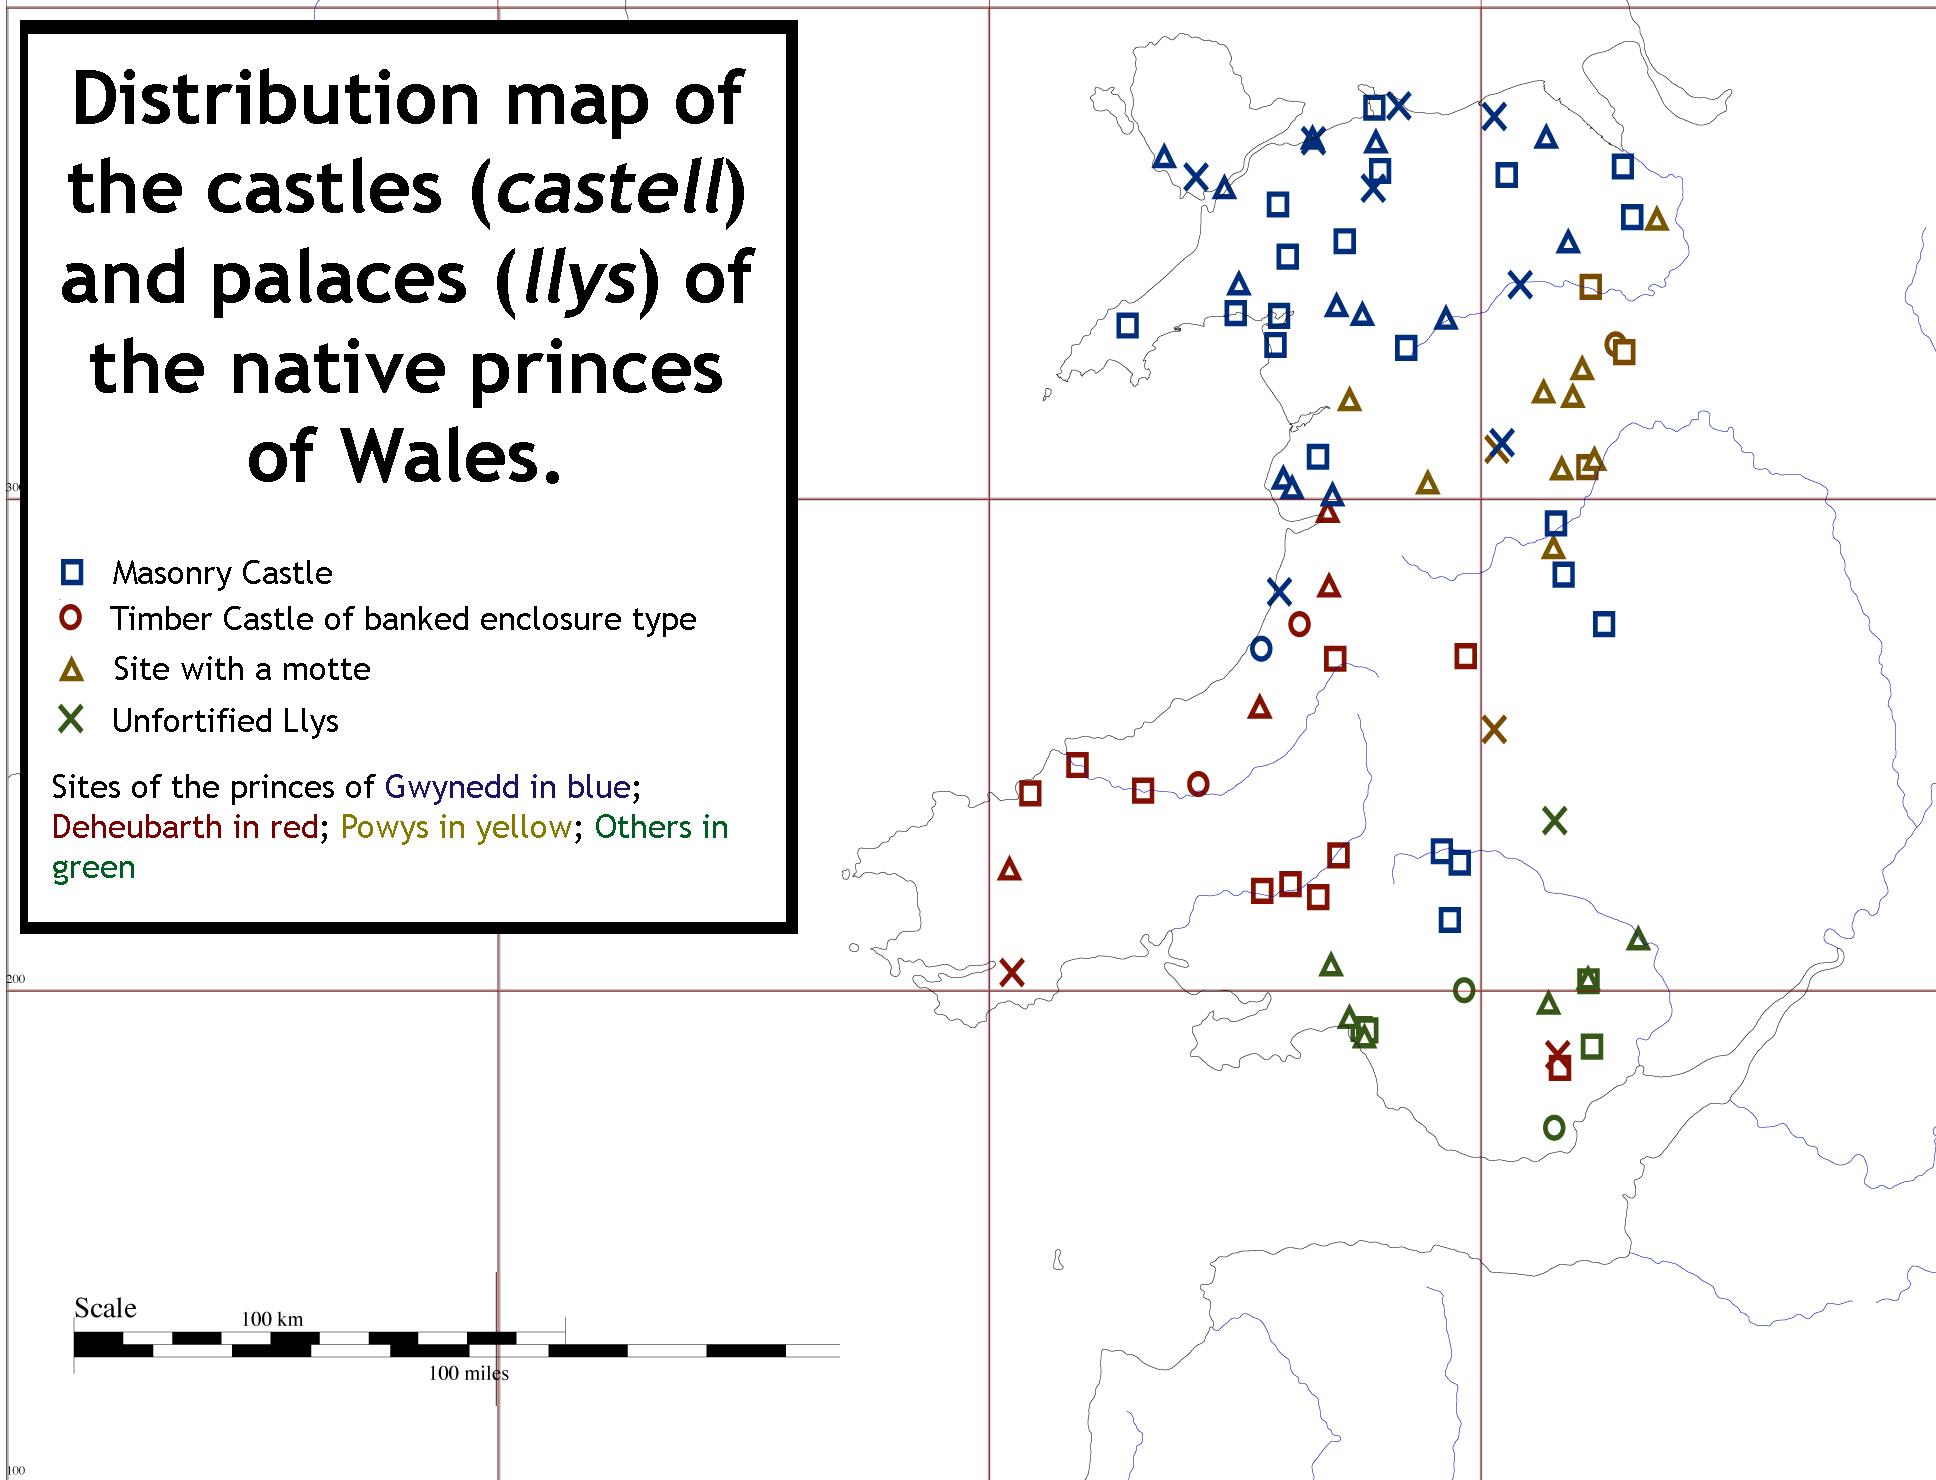 Distribution map of the castles and palaces of the native welsh princes